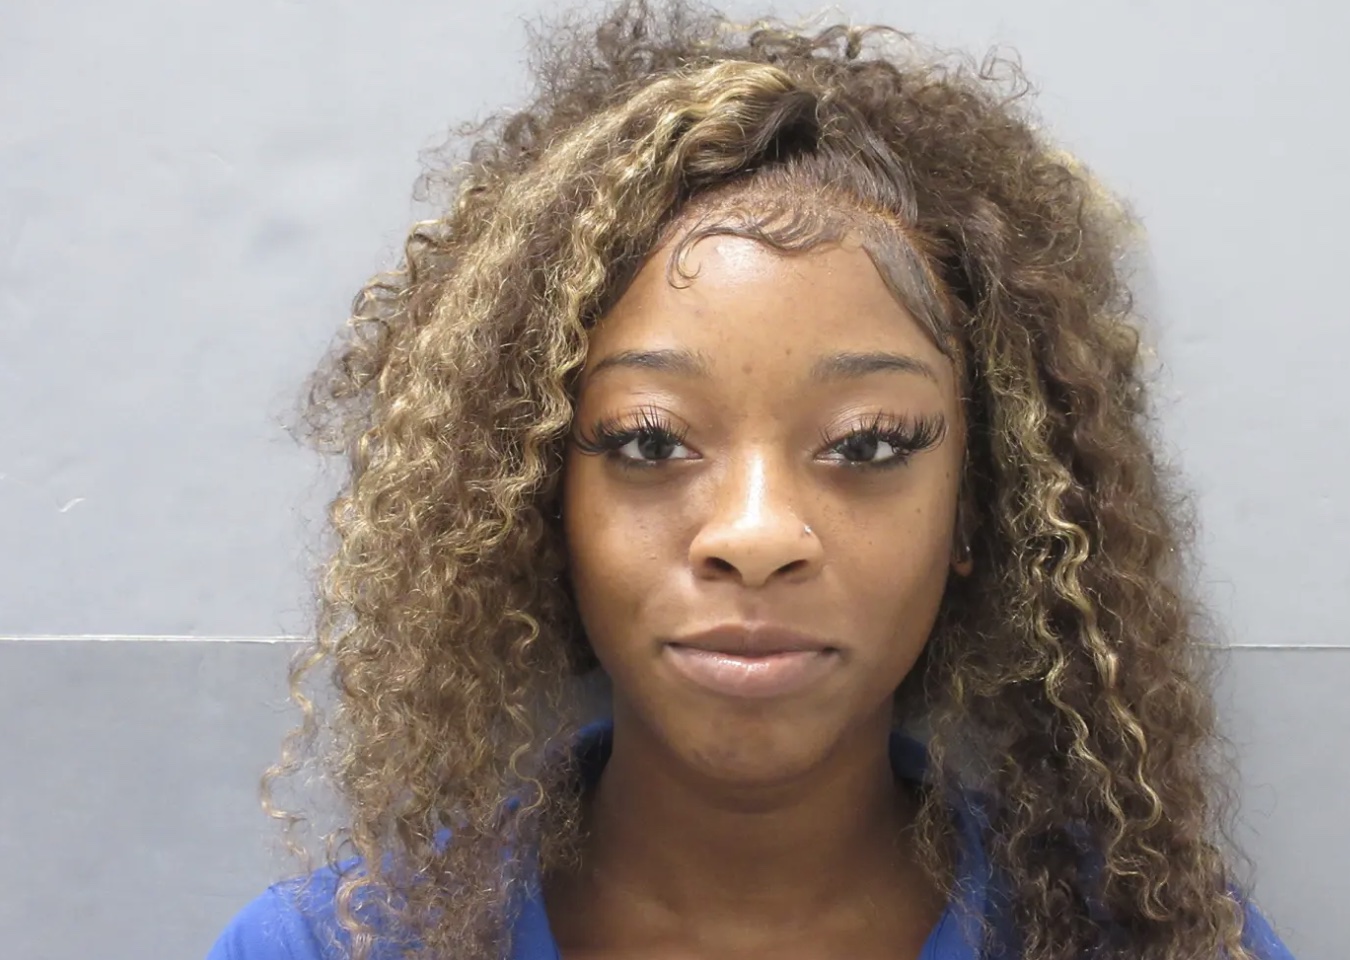 Florida Woman Tries To Get Arrested So She Can Check It Off Her Bucket List